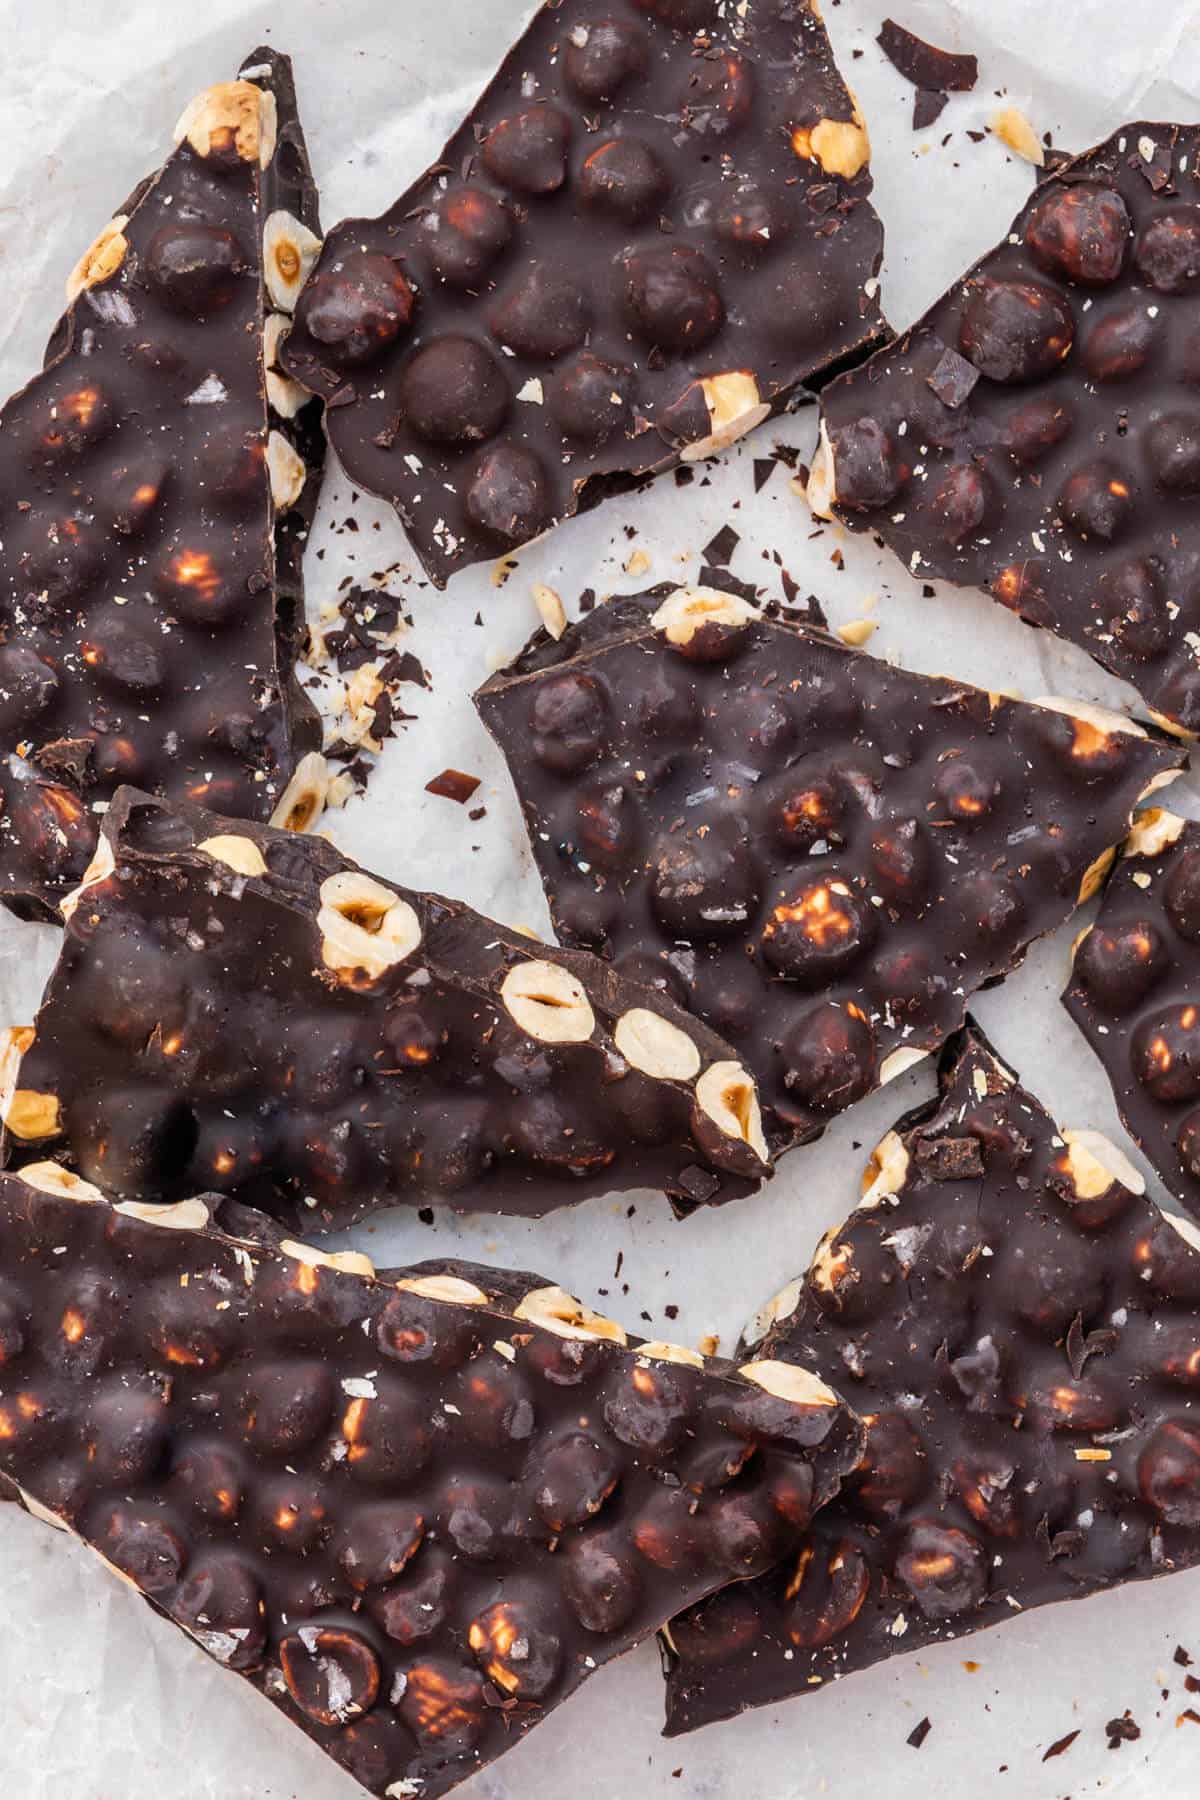 Hazelnut chocolate bark chopped in pieces on baking paper